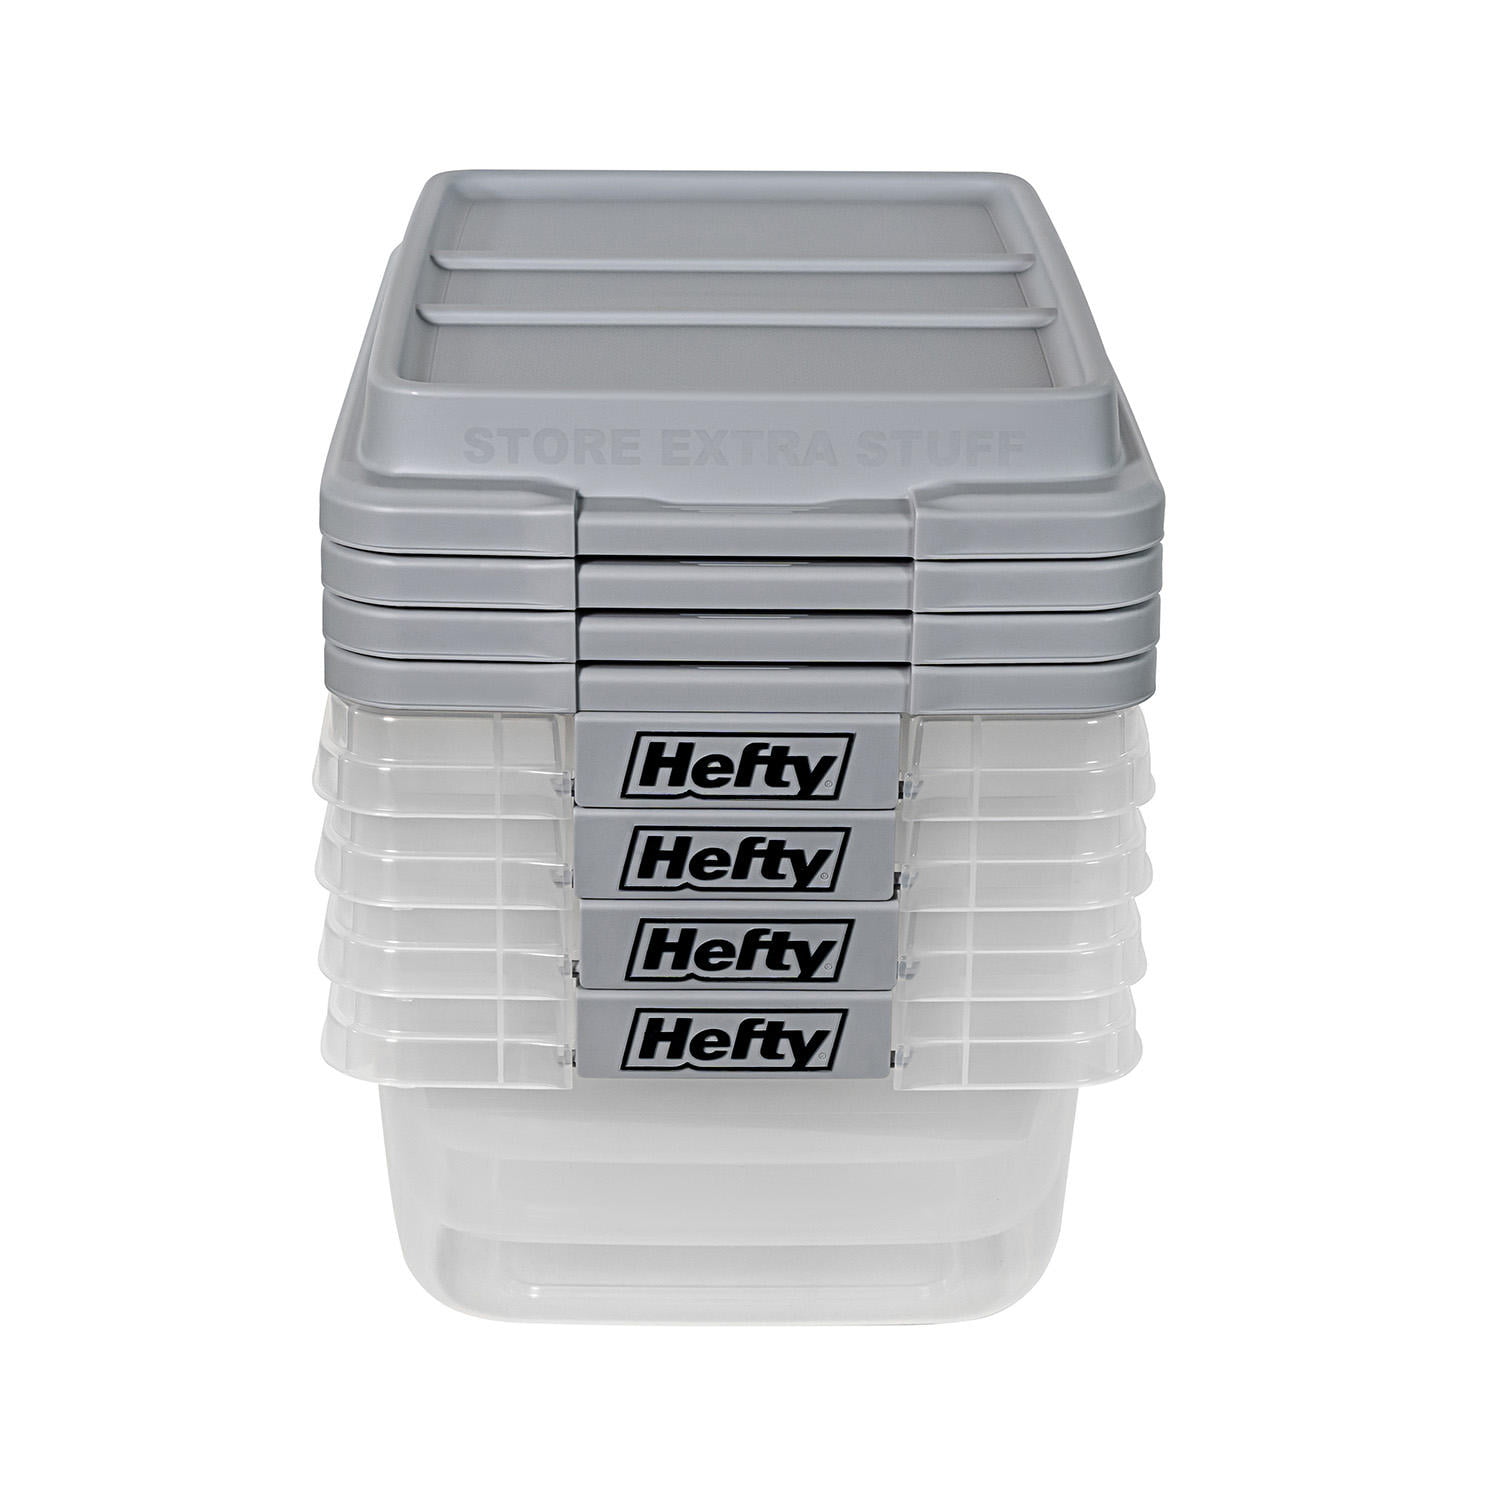 Hefty HFTPLT-71190105 Hi-Rise Storage Container, Clear/Charcoal